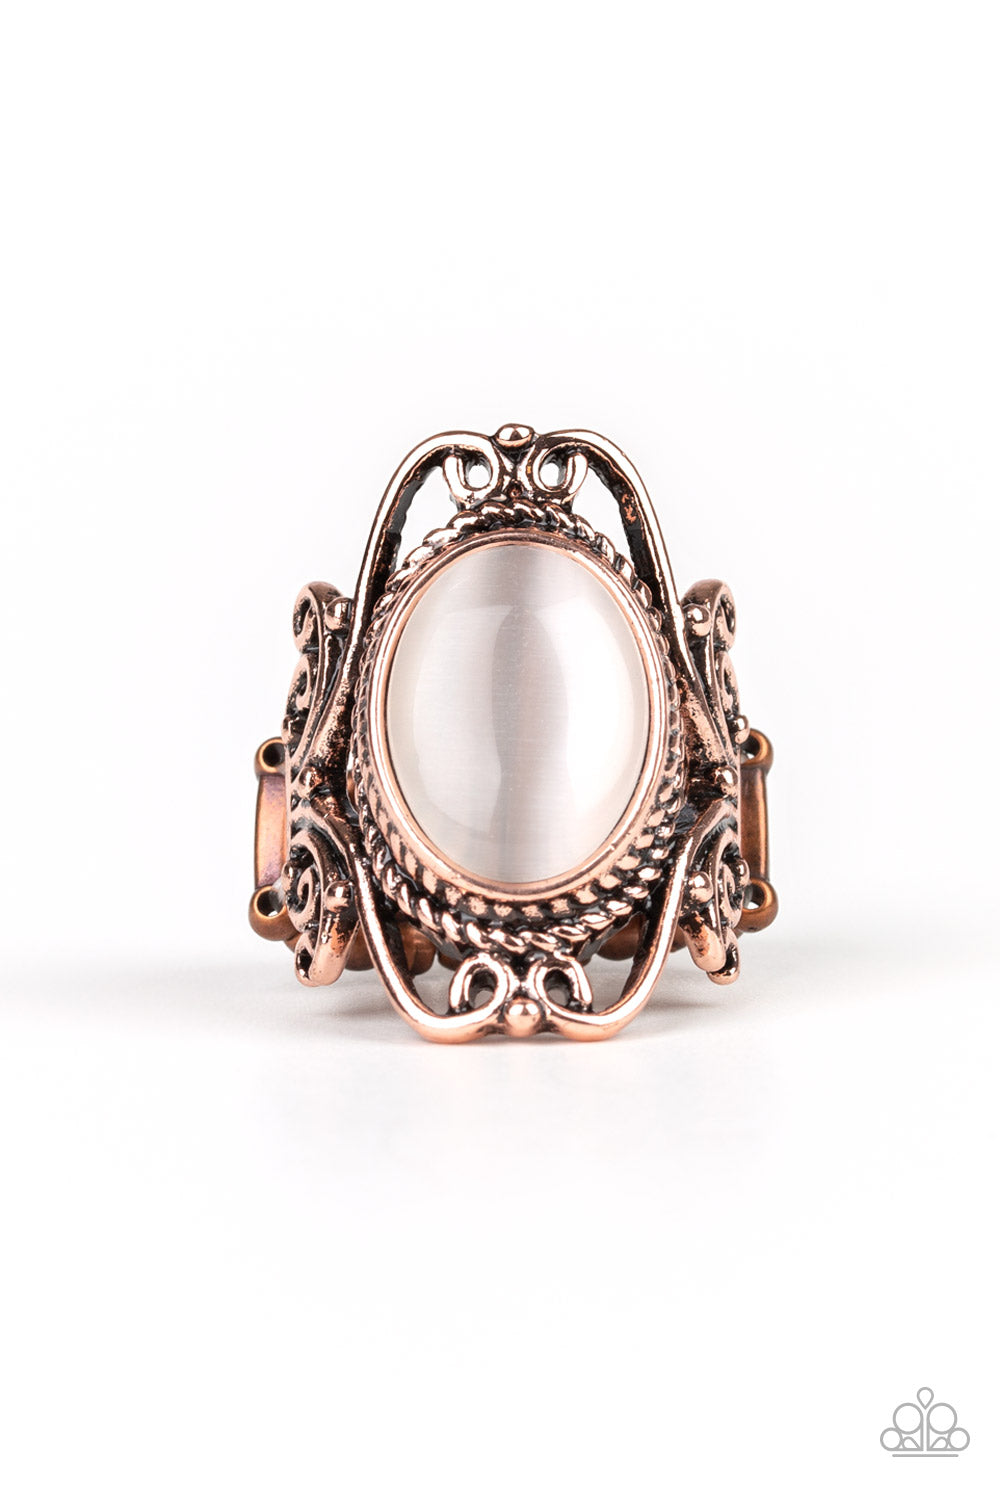 Fairytale Flair Copper Paparazzi Ring Cashmere Pink Jewels - Cashmere Pink Jewels & Accessories, Cashmere Pink Jewels & Accessories - Paparazzi